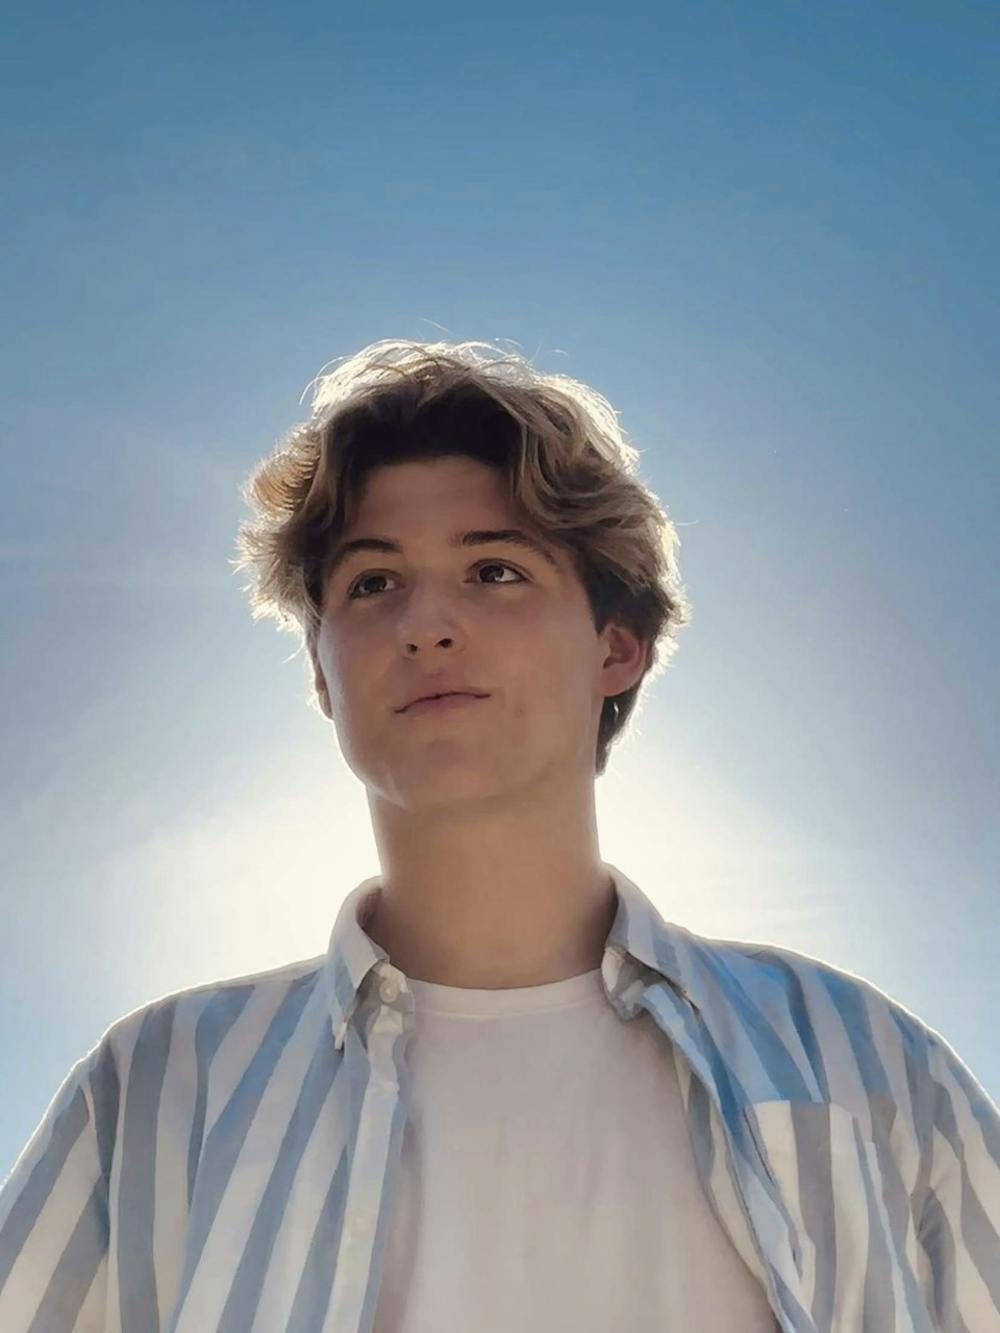 <p>A photo portrait of high school student musician David Vandelay of the South Carolina Governor’s School for the Arts and Humanities in Greenville, South Carolina. The Columbia native comes home on the weekends to perform at Soda City, which he has done since he was a young child.&nbsp;</p>